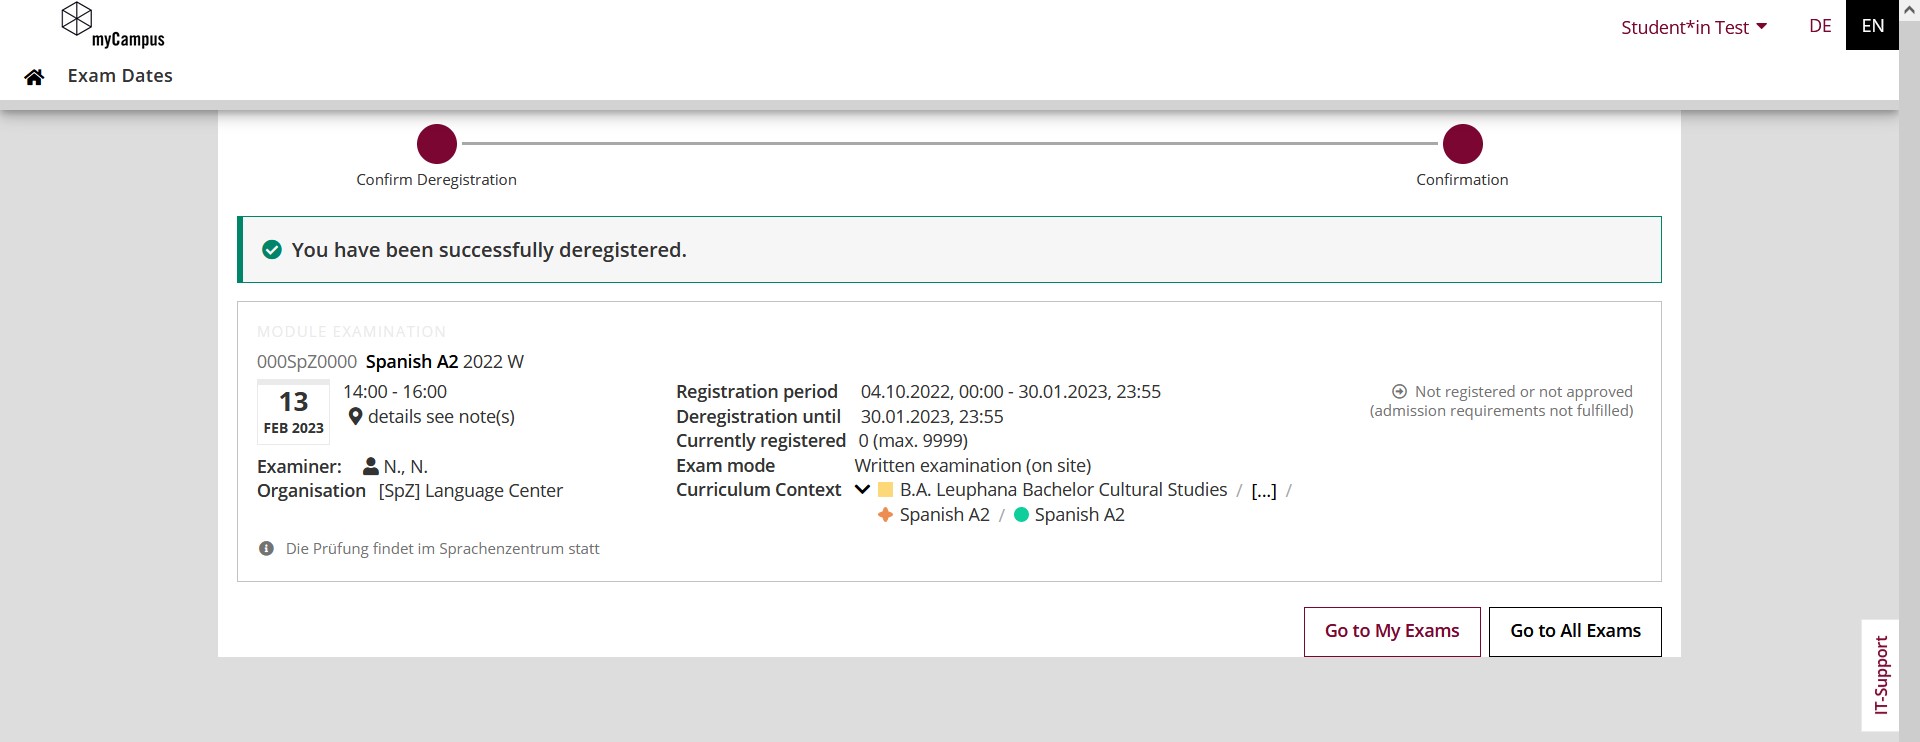 Confirmation of deregistration from exam date